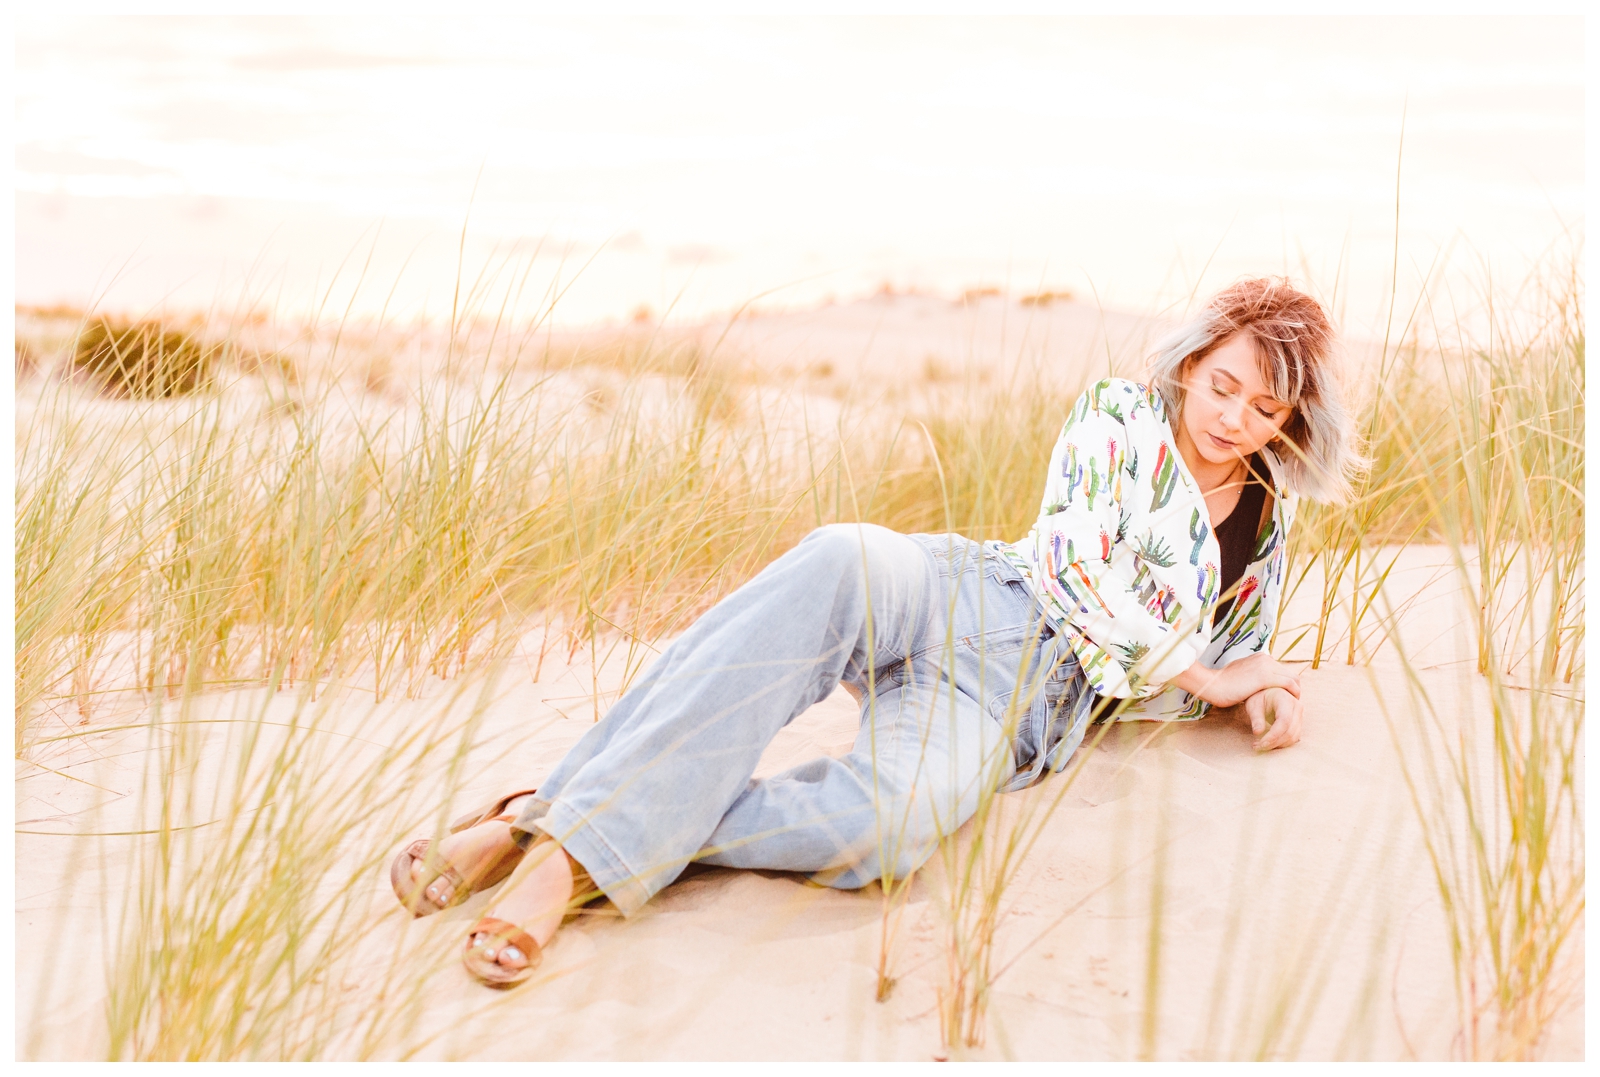 Quirky and Colorful Senior Portrait Session Inspiration - Outer Banks, North Carolina - Brooke Michelle Photography